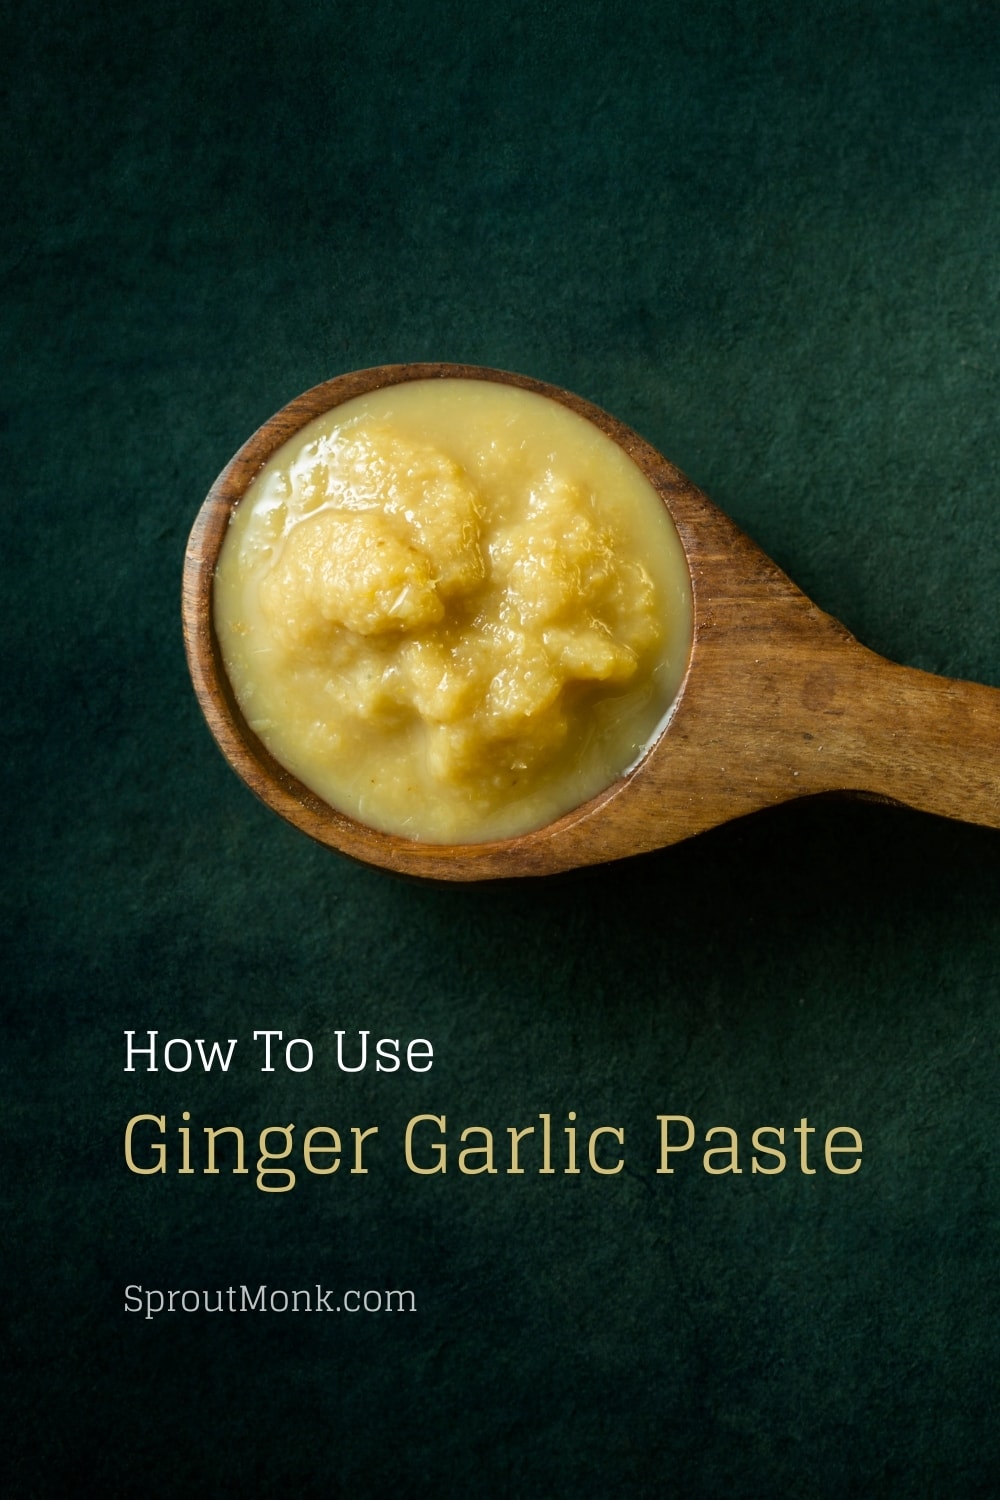 ginger garlic paste while cooking cover image